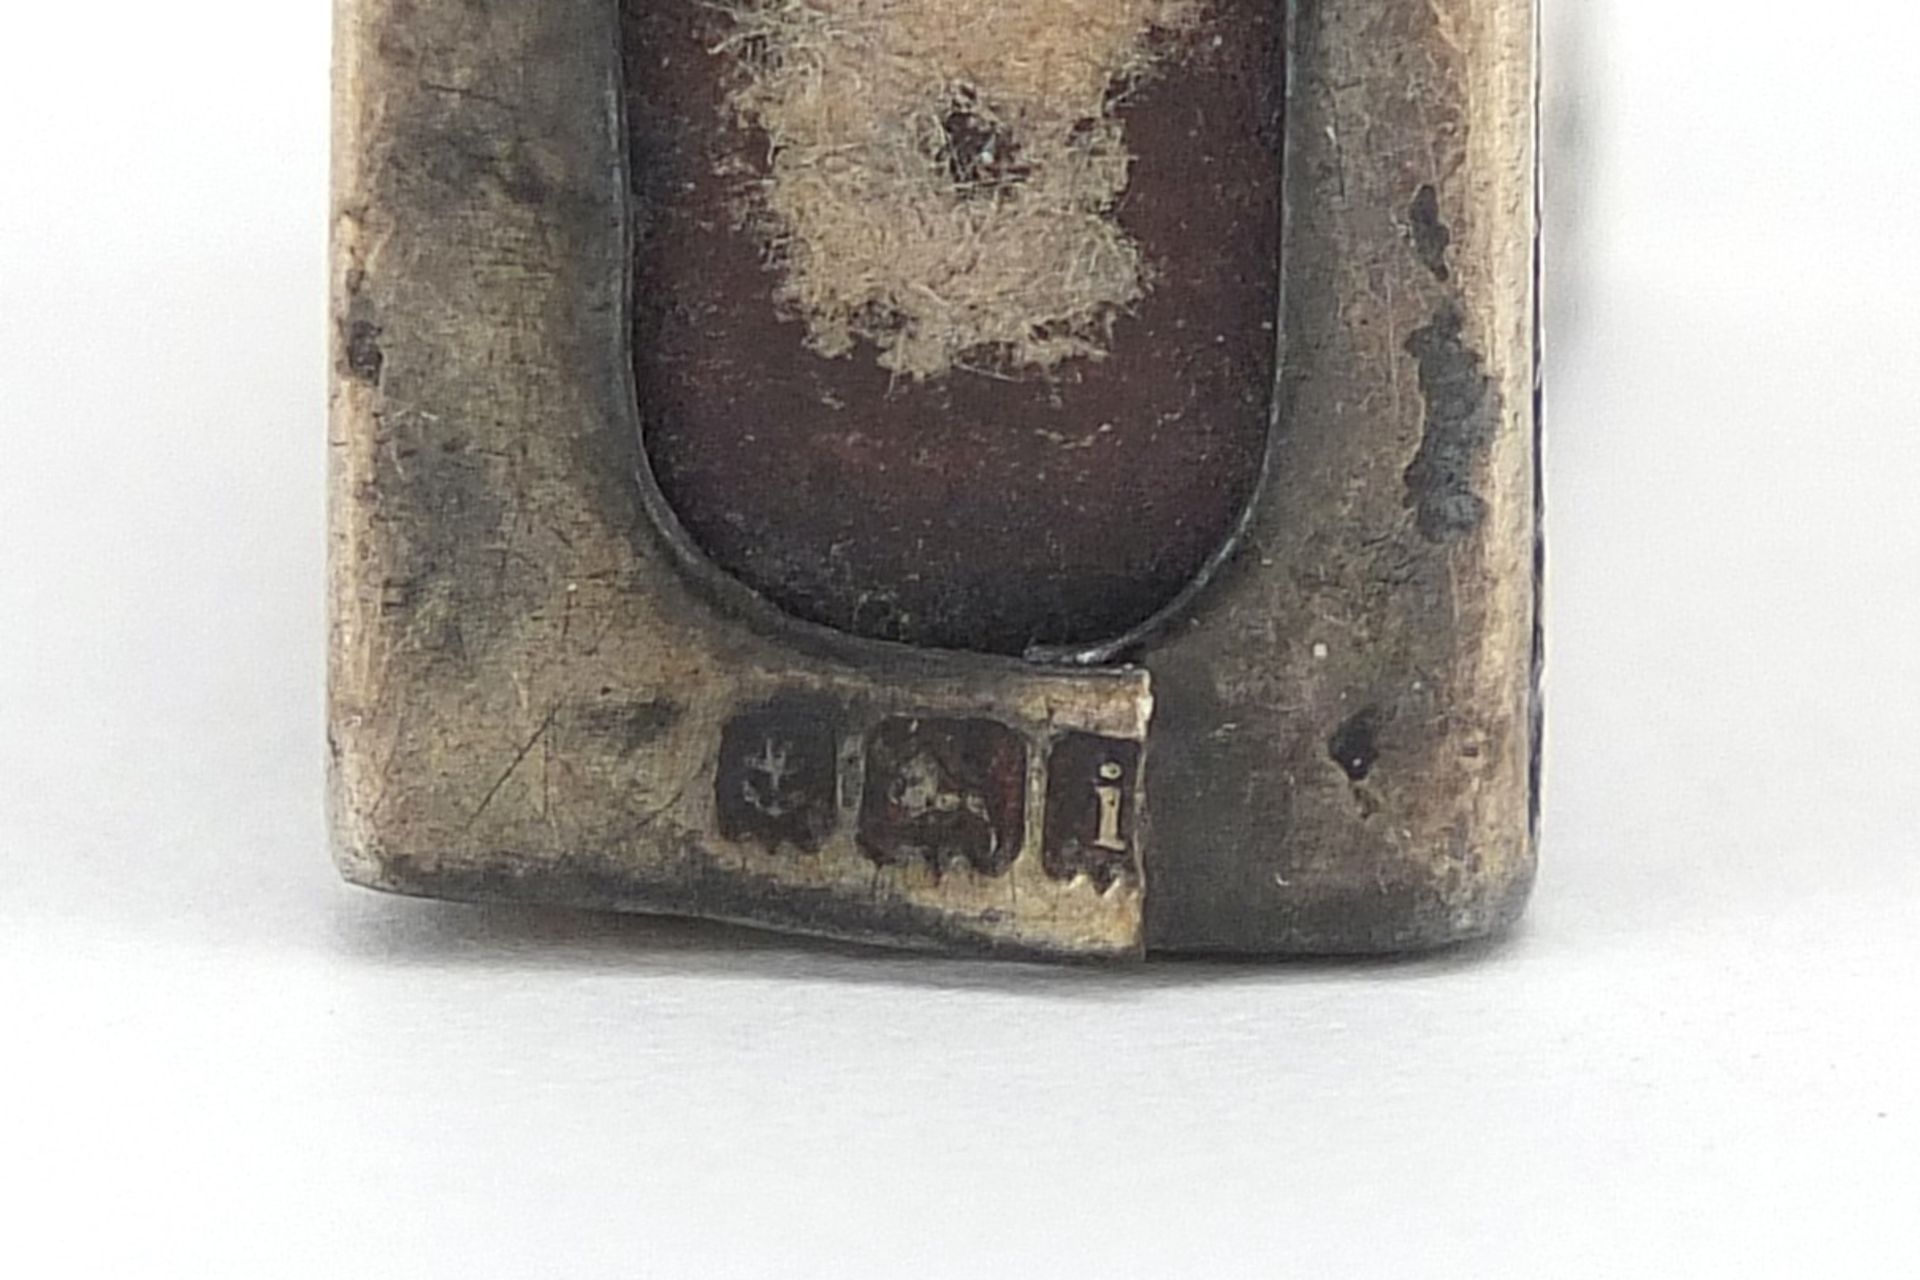 Royal Mail Steam Packet Company silver and enamel matchbox case, indistinct maker's mark, Birmingham - Image 4 of 5